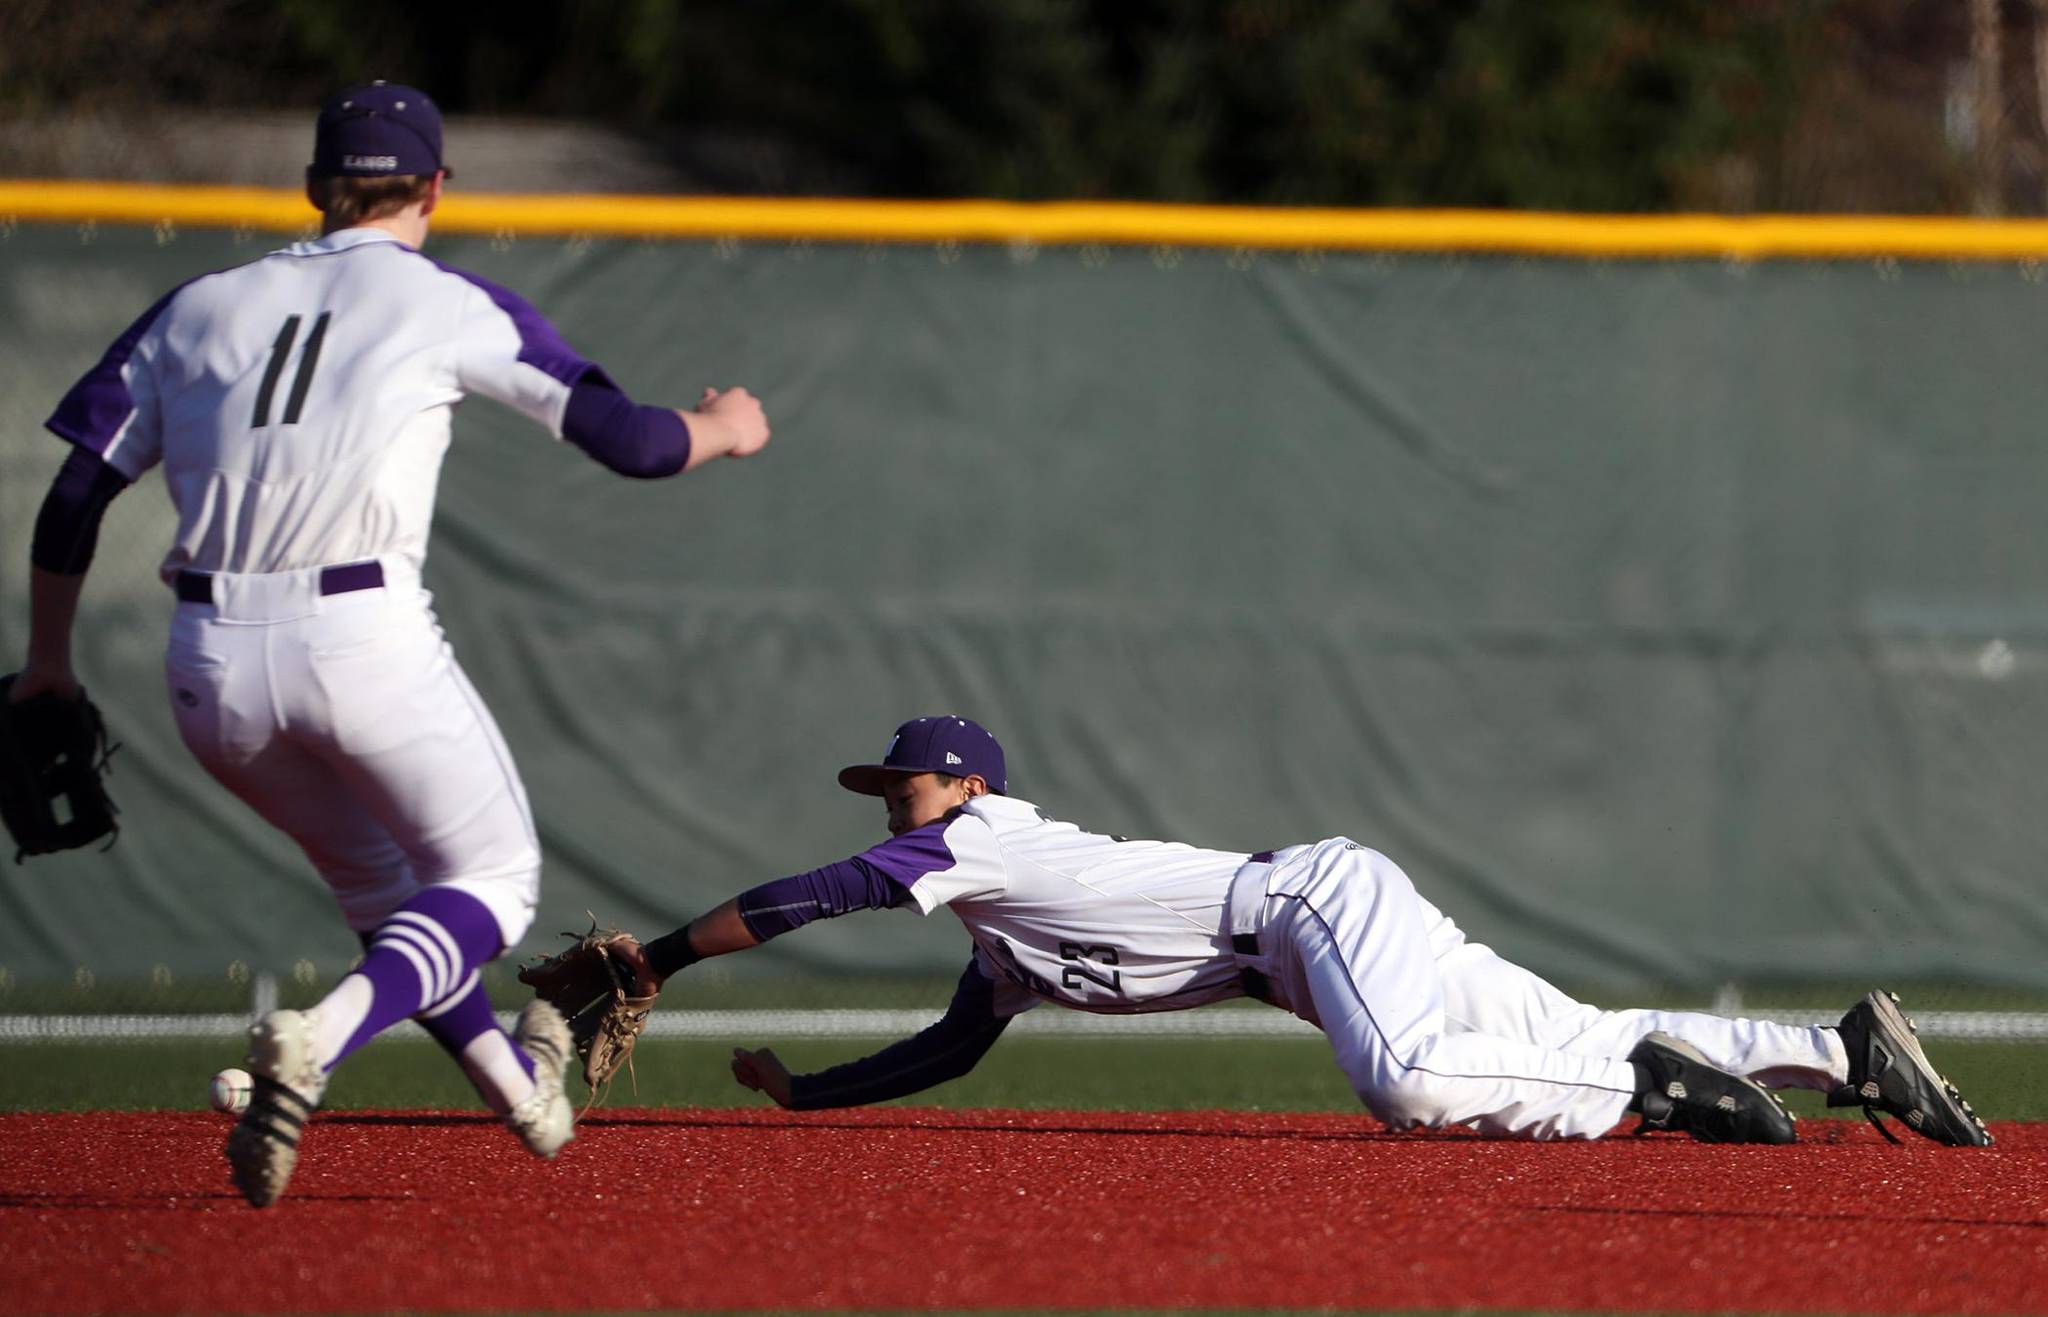 Lake Washington shortstop Travis Lee dives for the ball while Alex Lyon looks on during Wednesday’s game. Corky Trewin photo